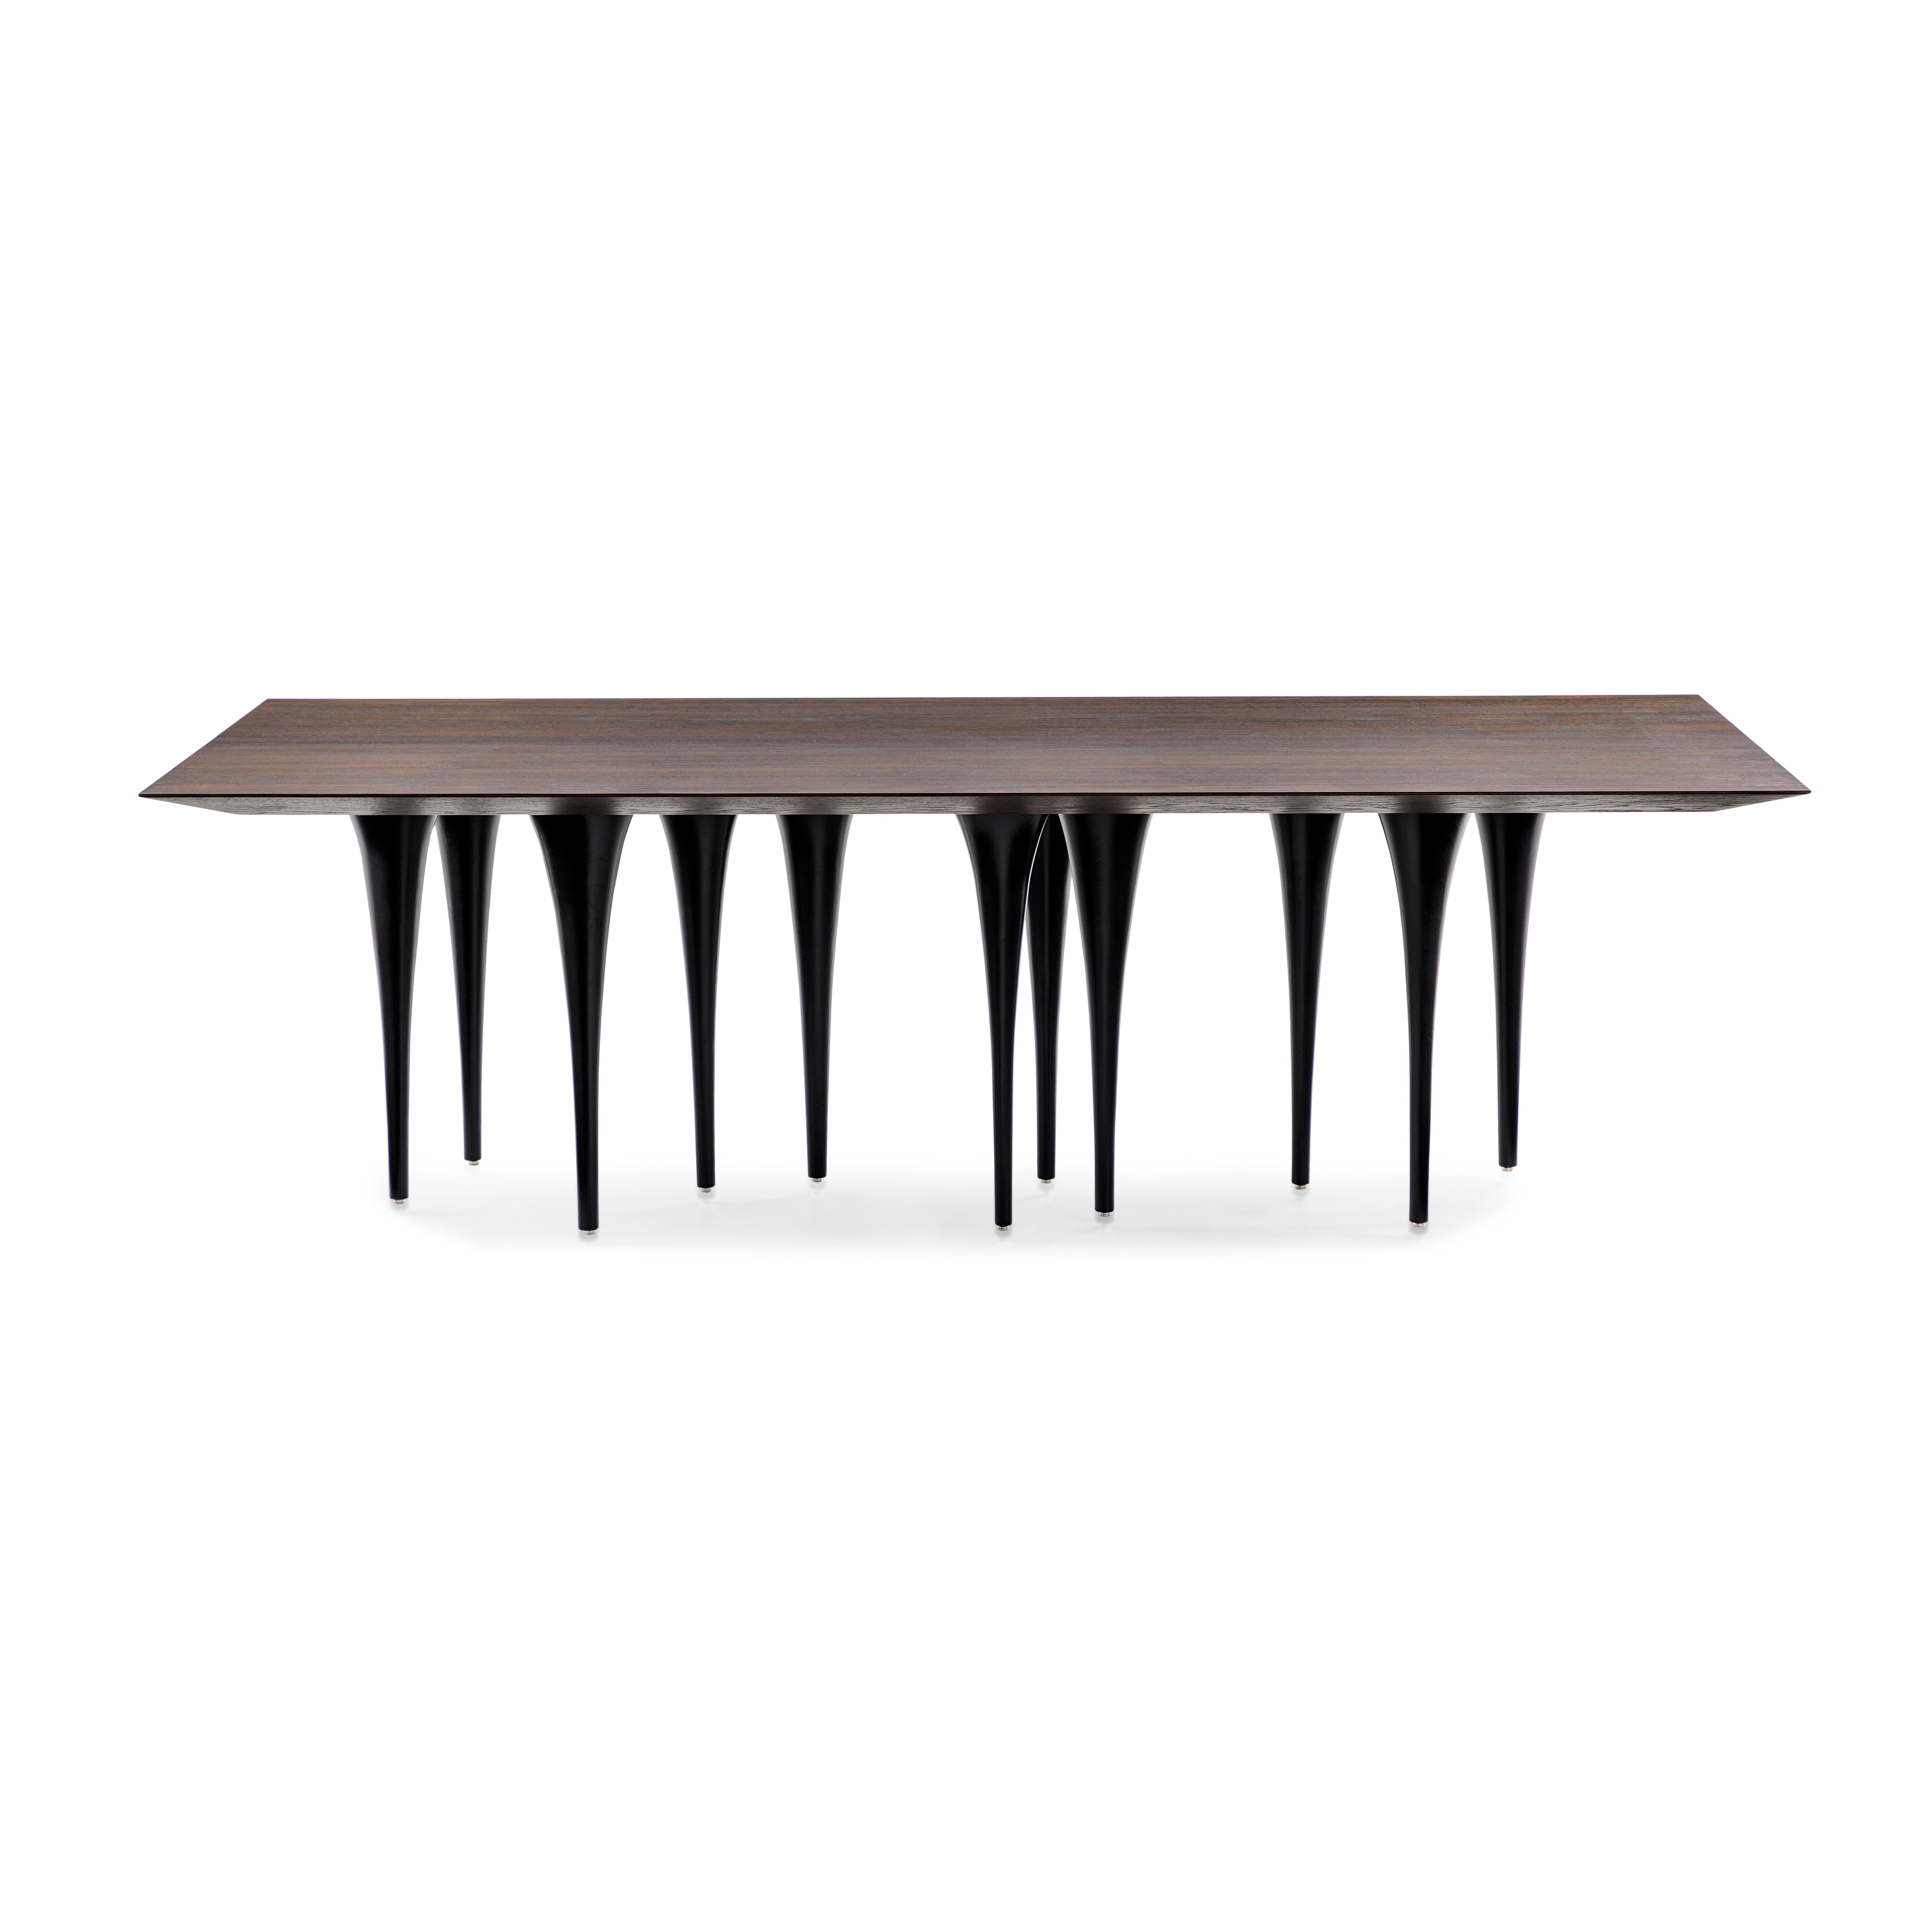 Contemporary Pin Dining Table with Veneered Black Oak Top and 12 Black Legs 98''